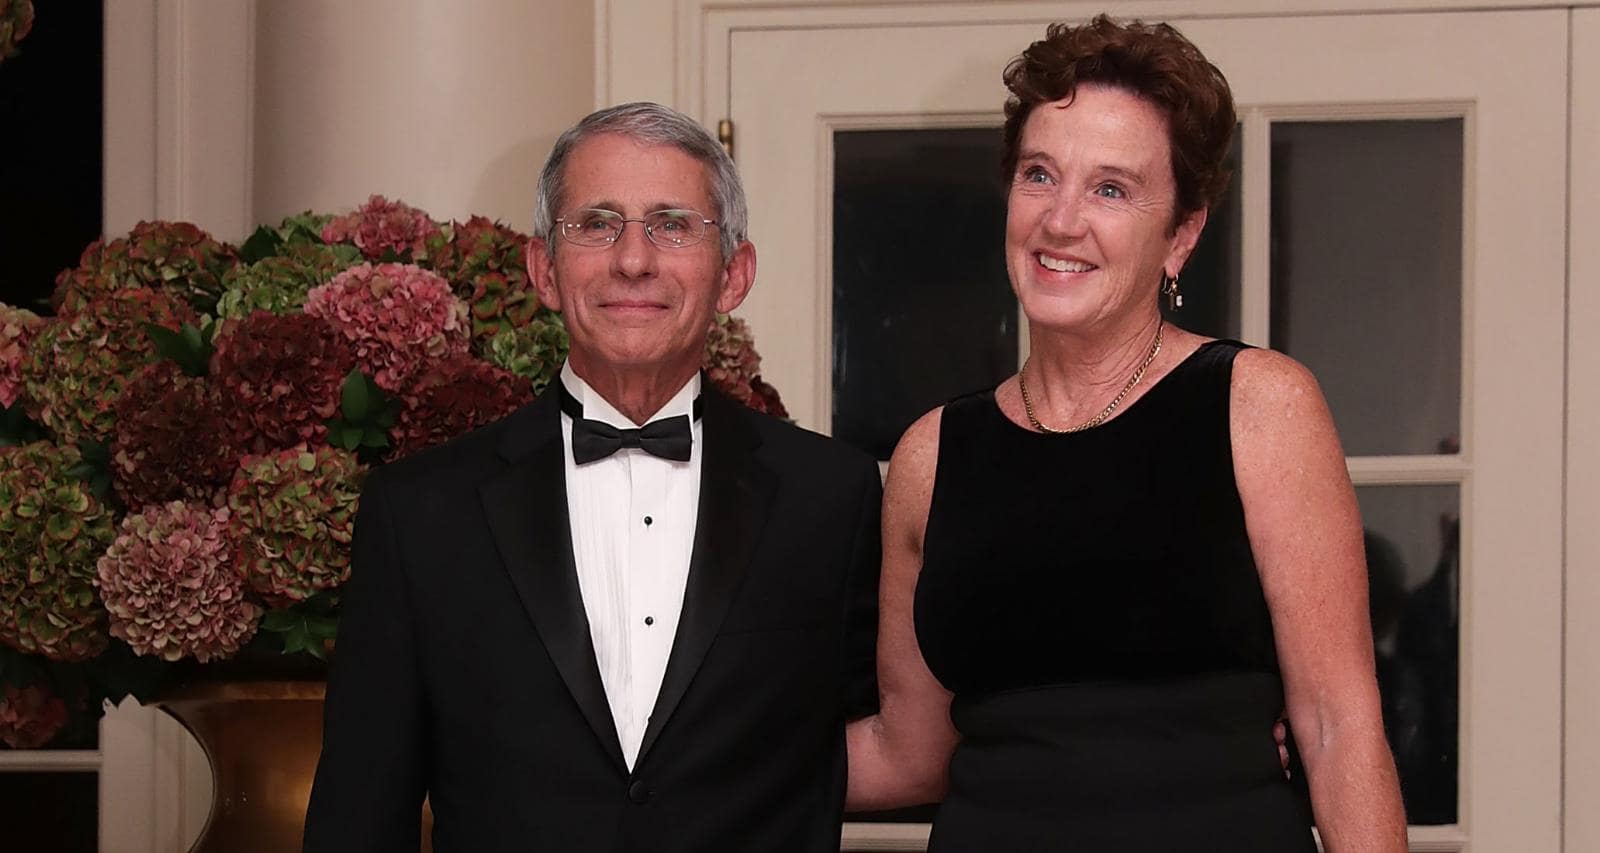 Christine Grady Fauci Wiki, Age, Family, Parents, Kids, Education, Career and Facts About Dr. Anthony Fauci’s Wife